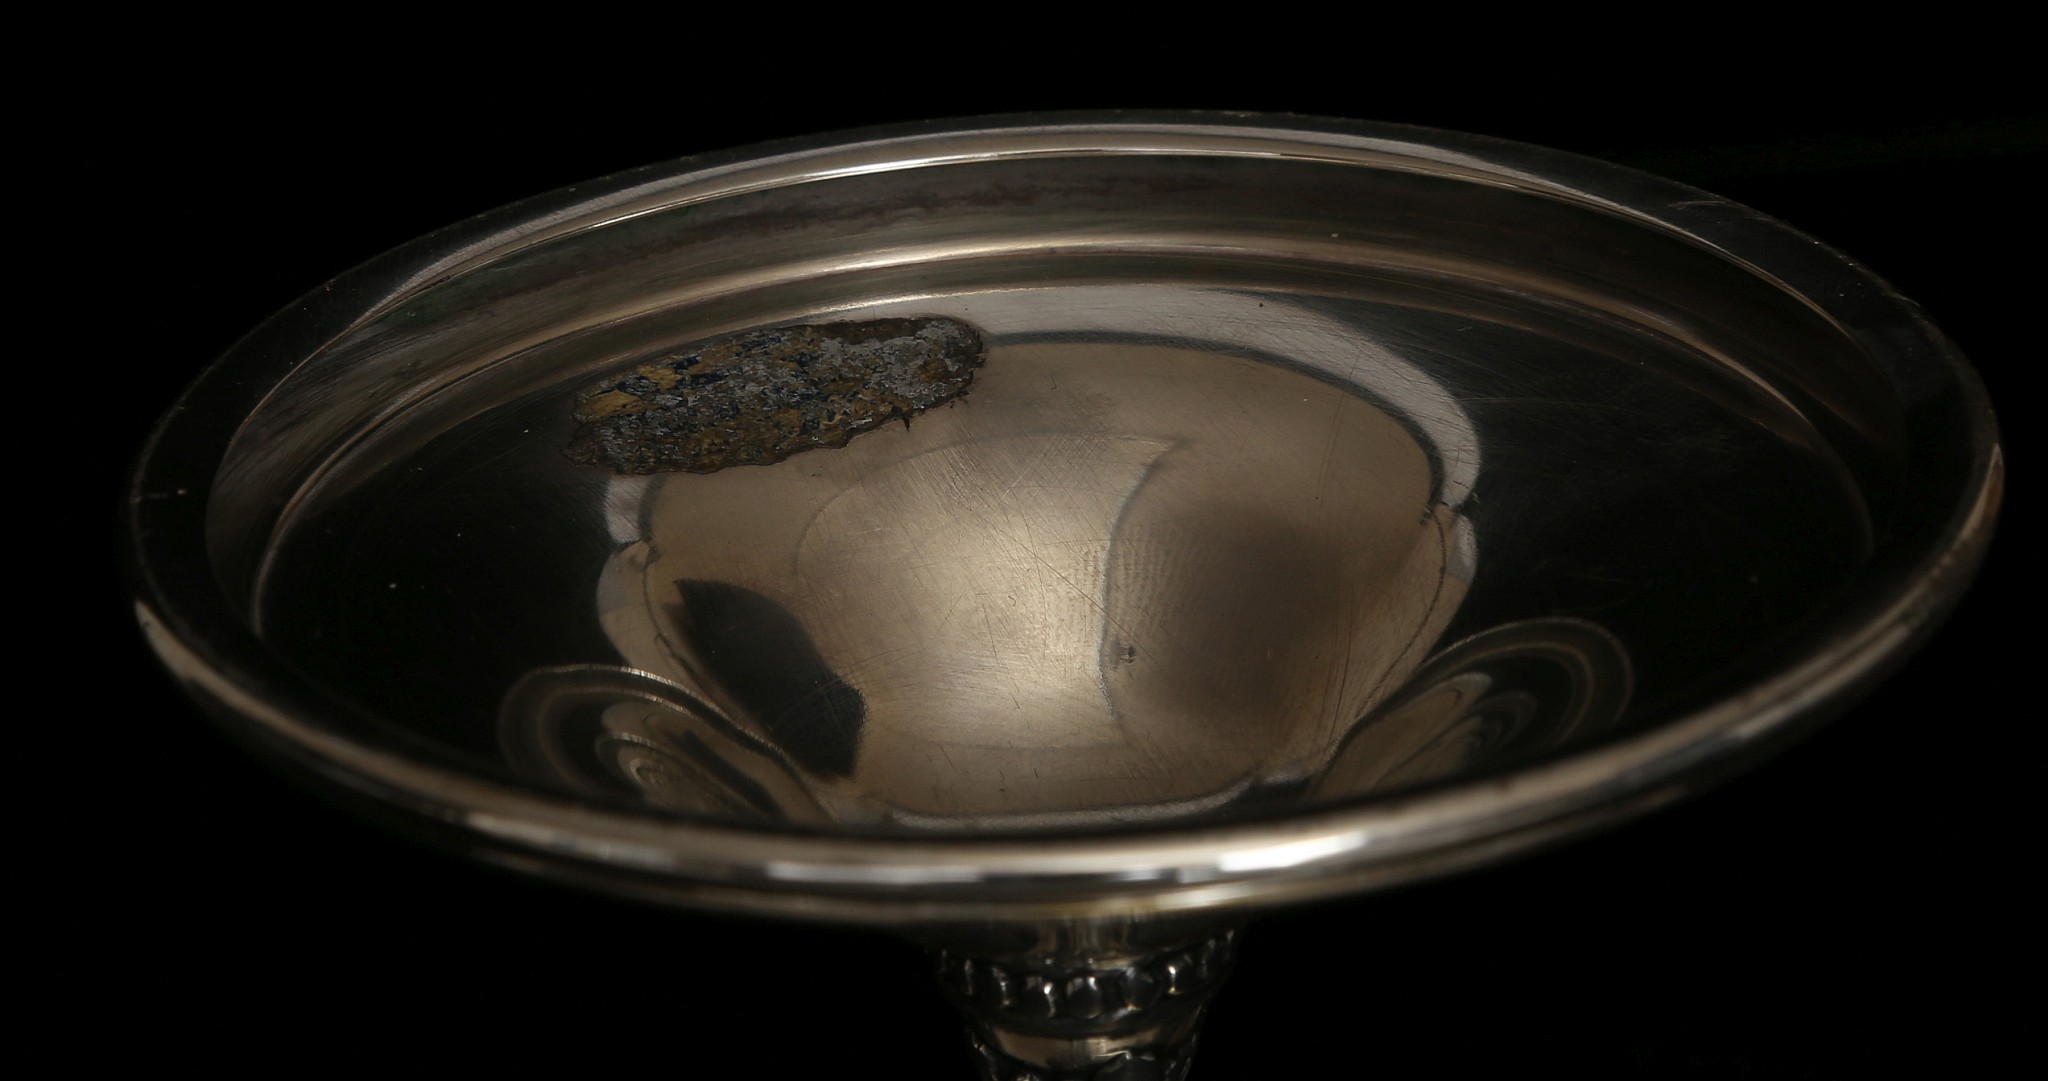 Redd & Barton, Taunton, Massachusetts, an early 20th century silver plated comport pedestal dish, - Image 4 of 4